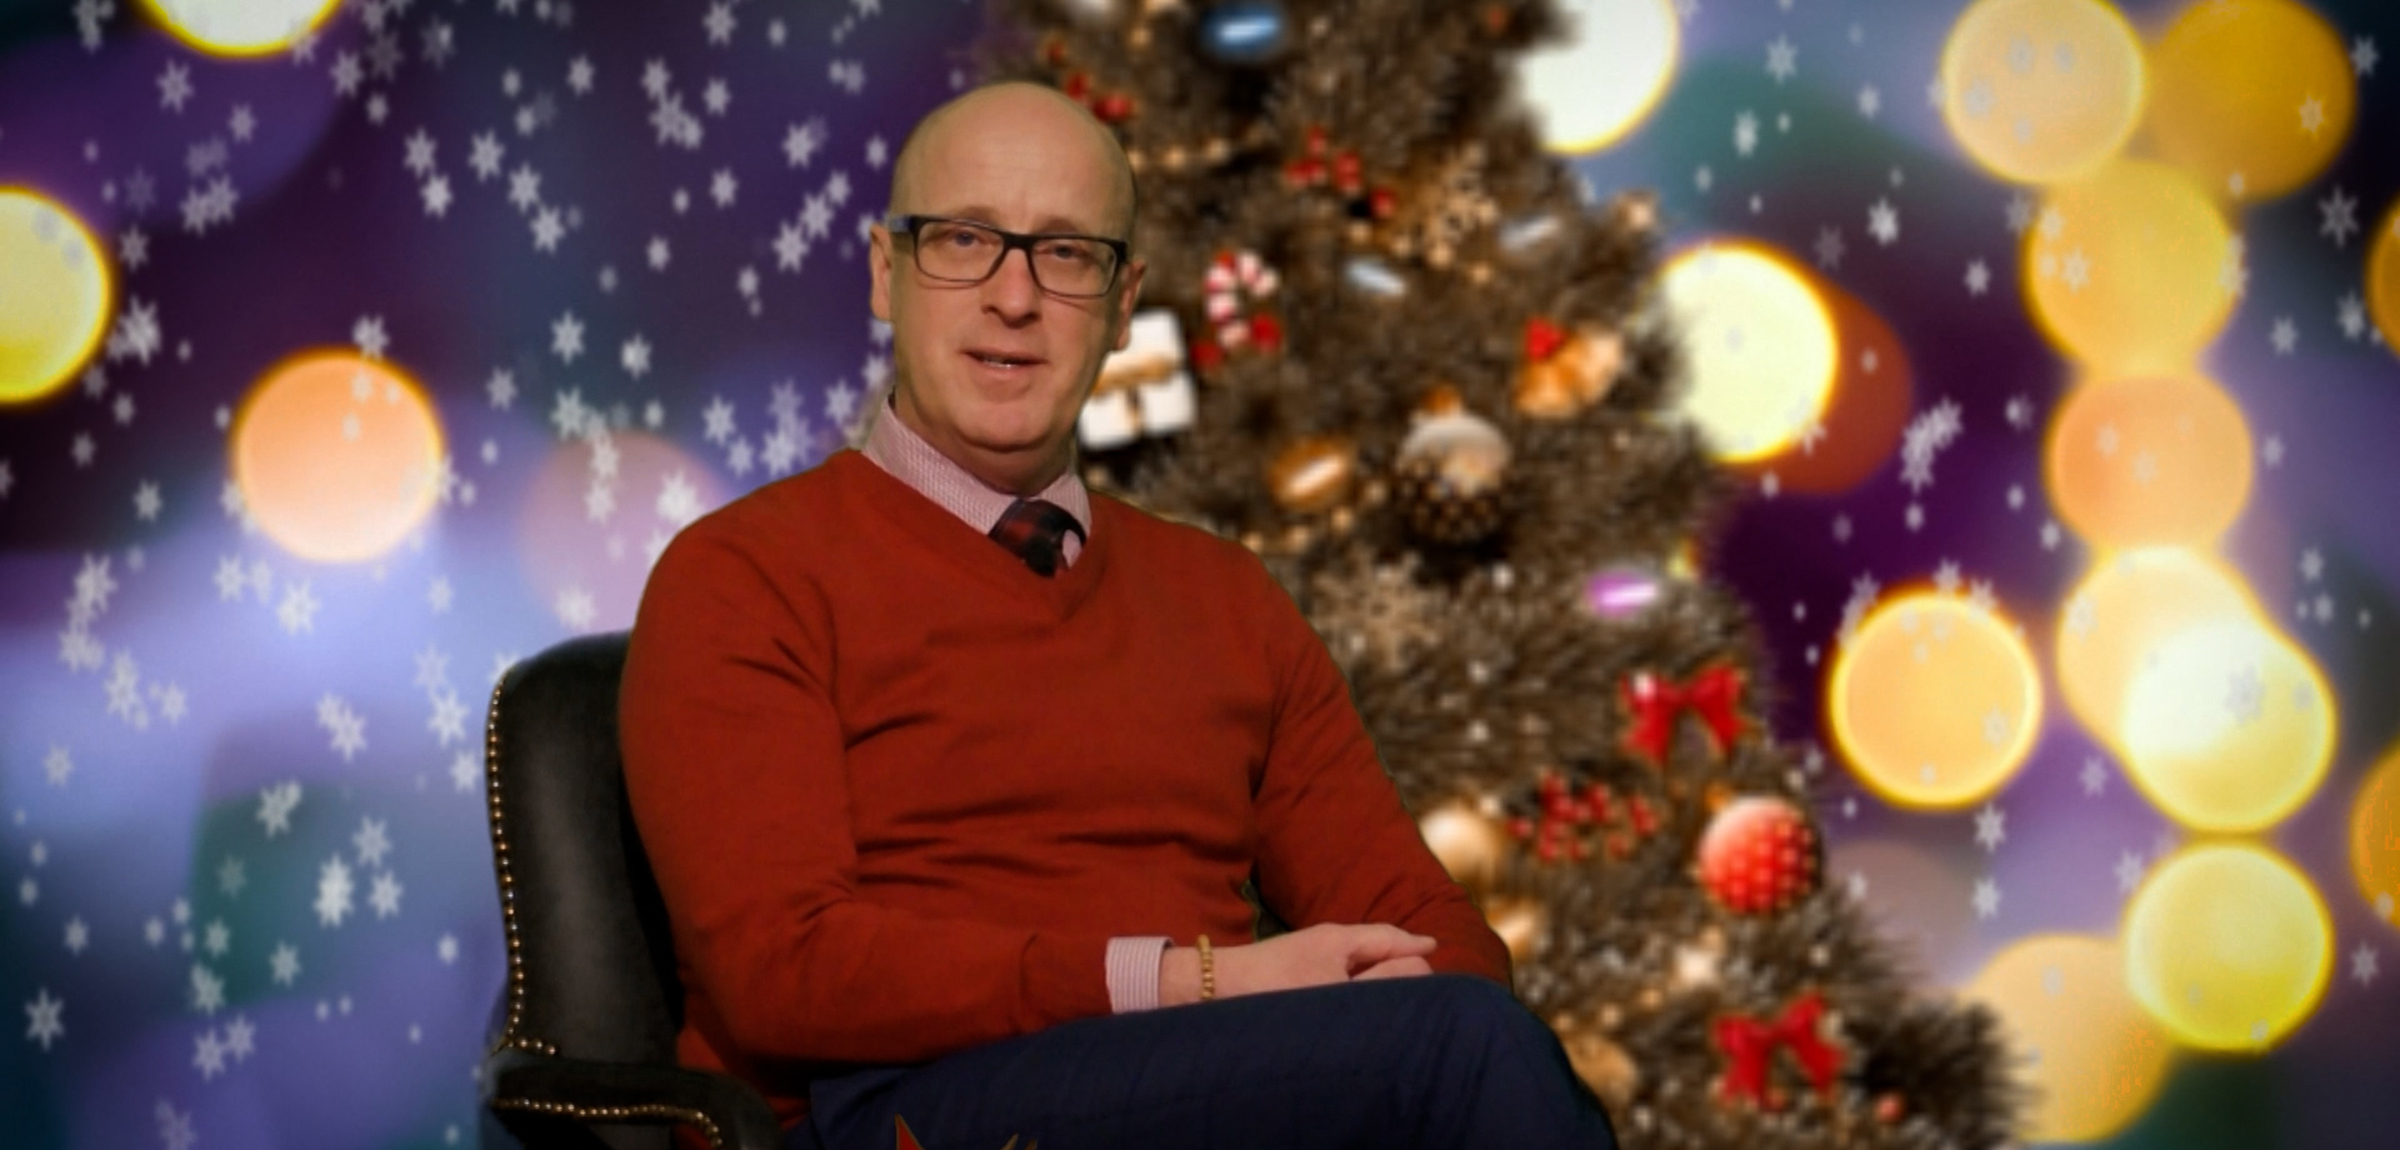 ATA president Jason Schilling seated in a red sweater in front of a Christmas tree